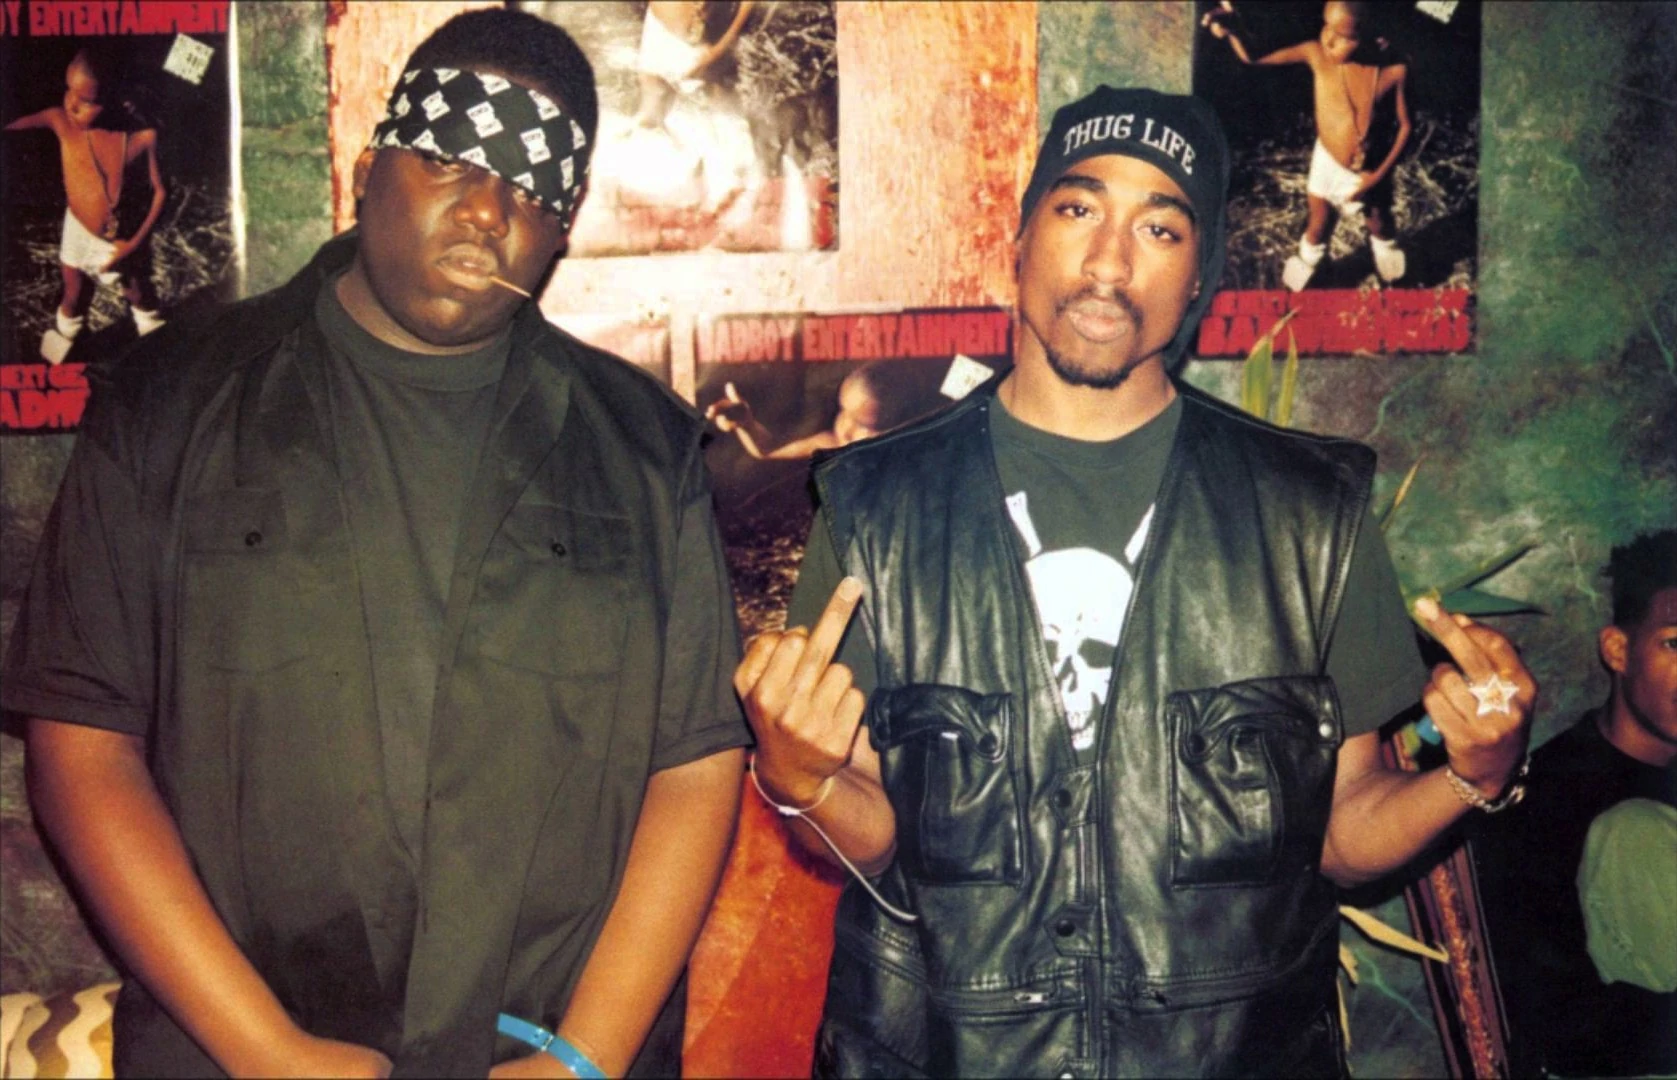 Biggie and Tupac representing the East and West Coast.